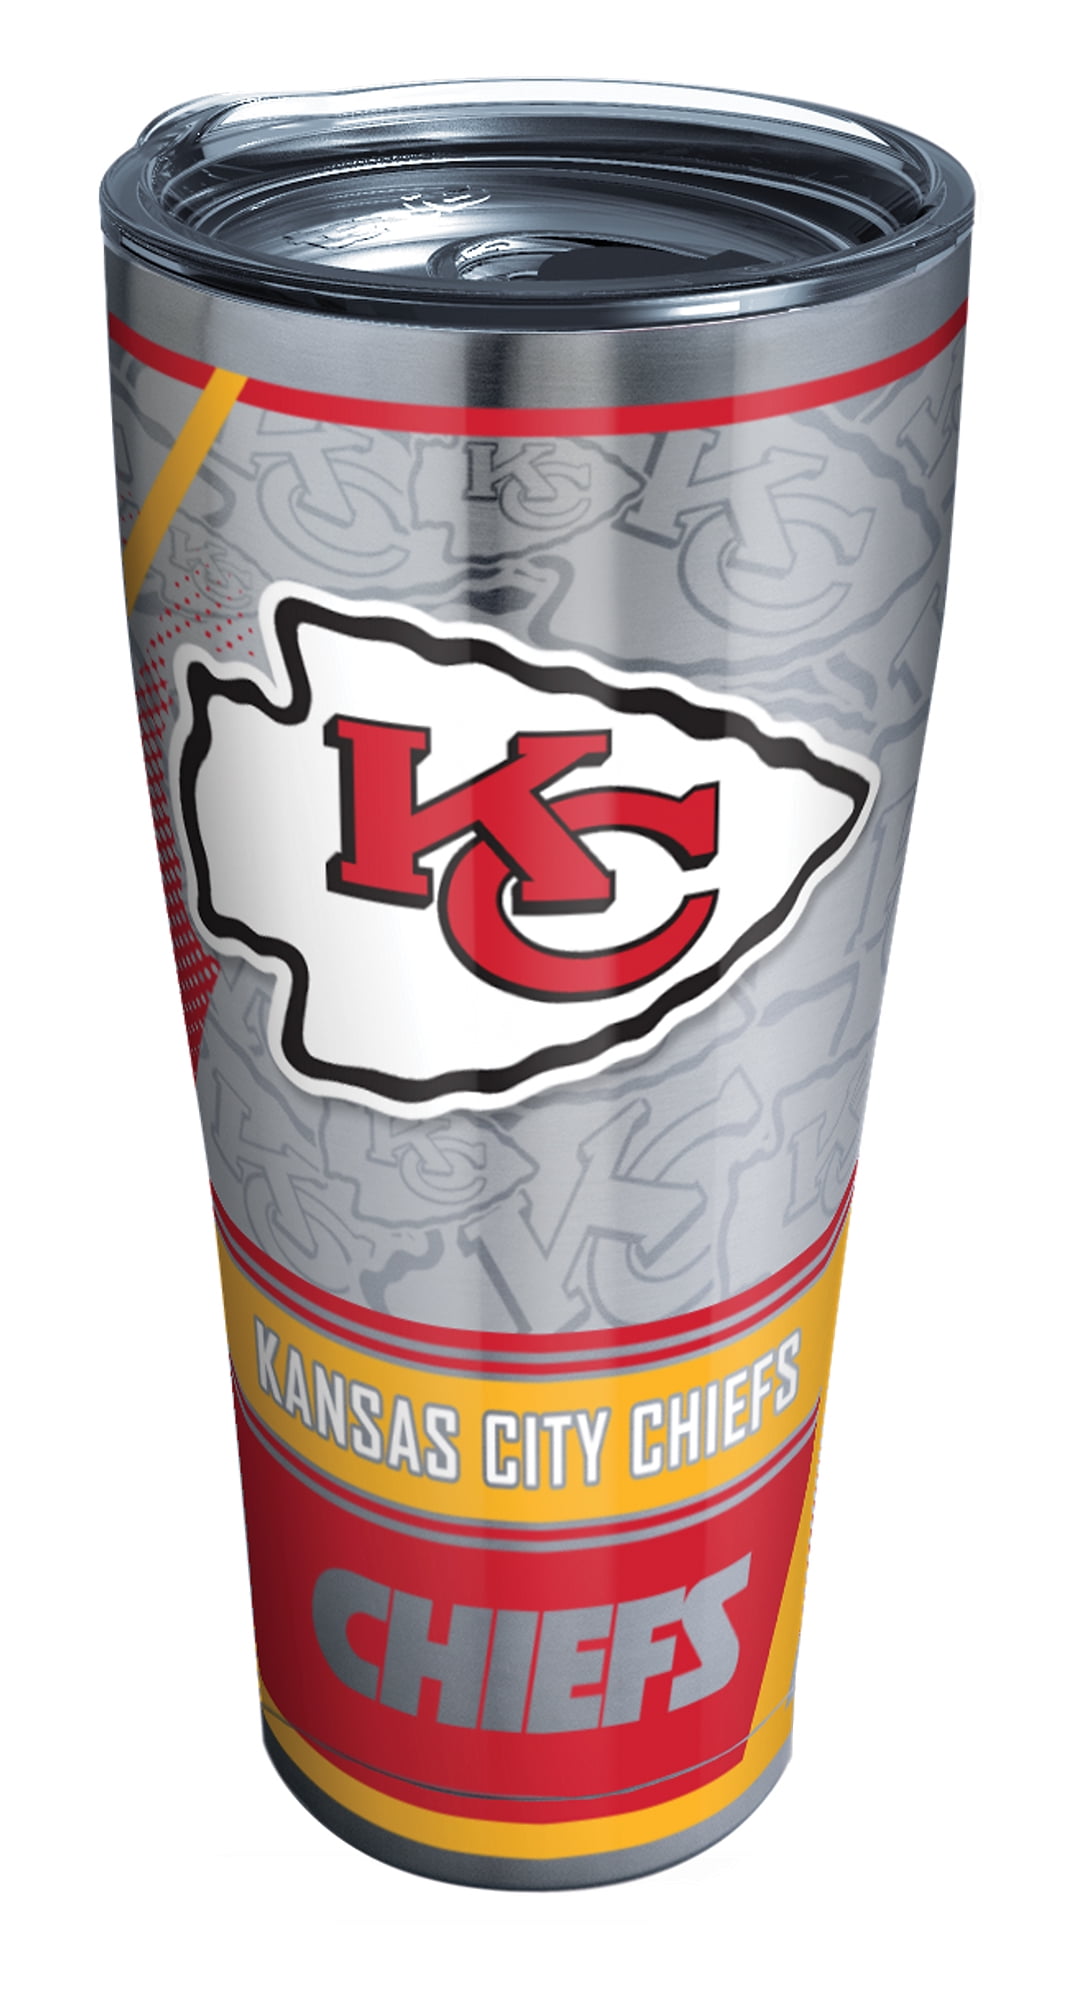 Officially Licensed NFL Tervis Tumbler Insulated Cups - 4-pack - Chiefs